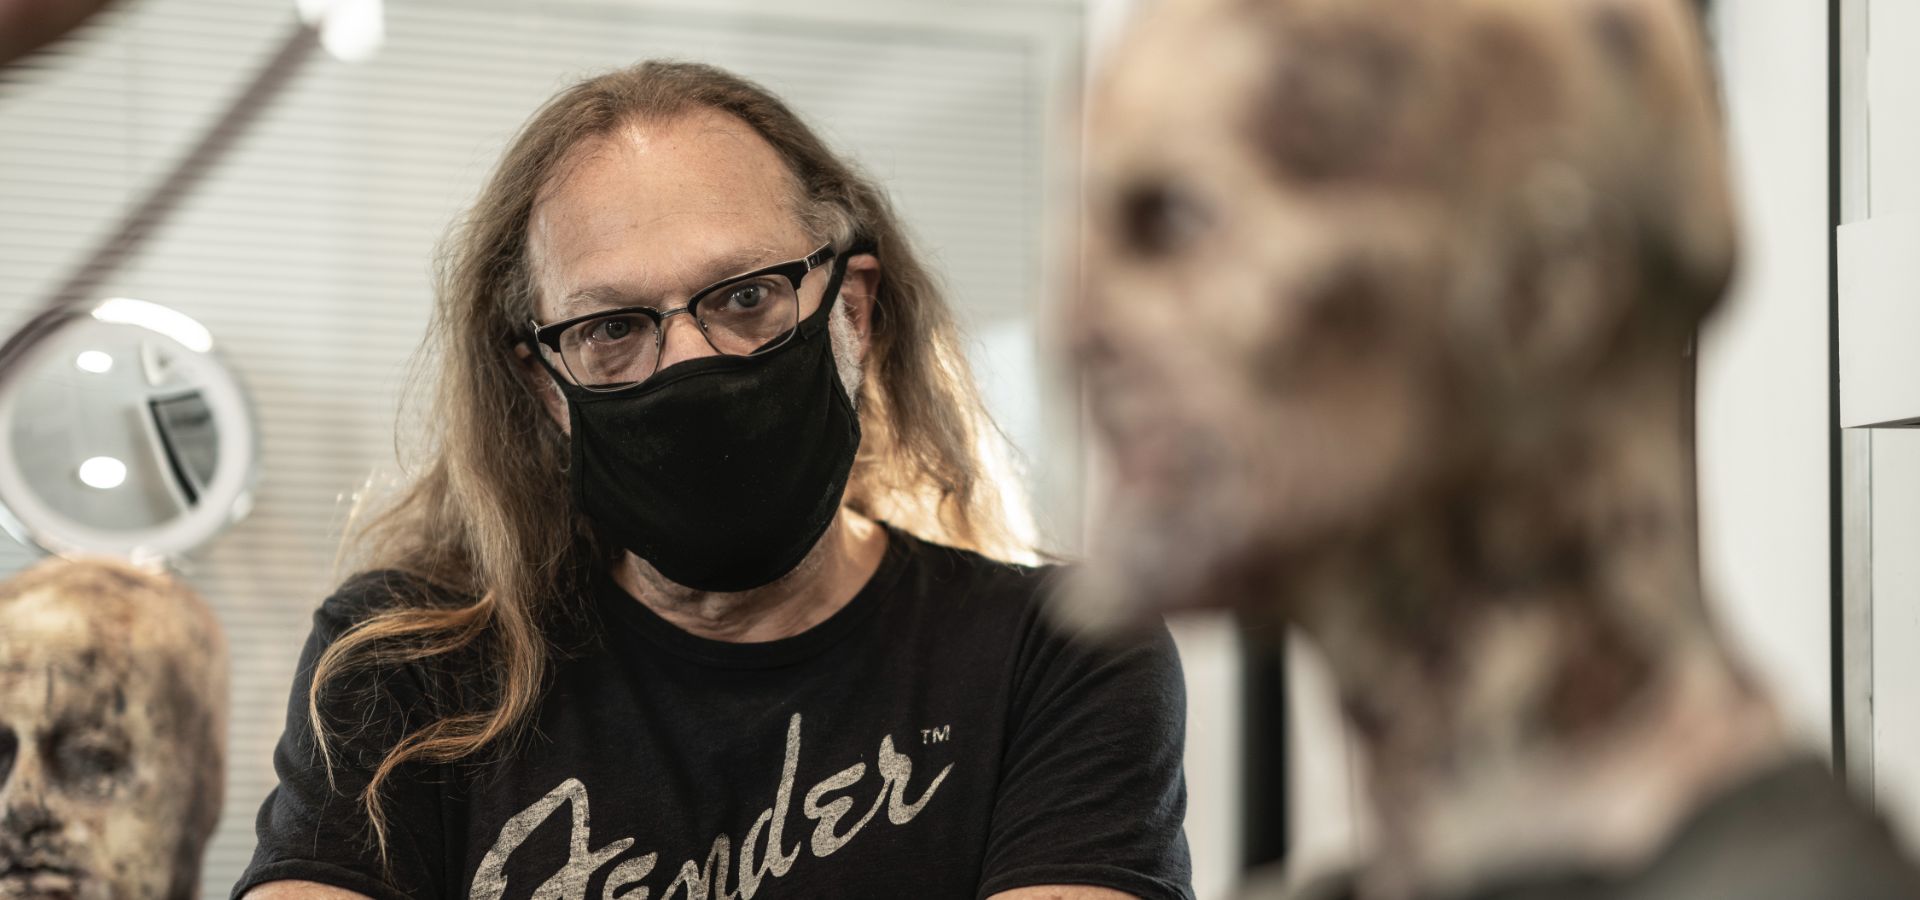 The Walking Dead Q&A — Greg Nicotero Reflects on TWD's Legacy and Dishes On Playing a Walker